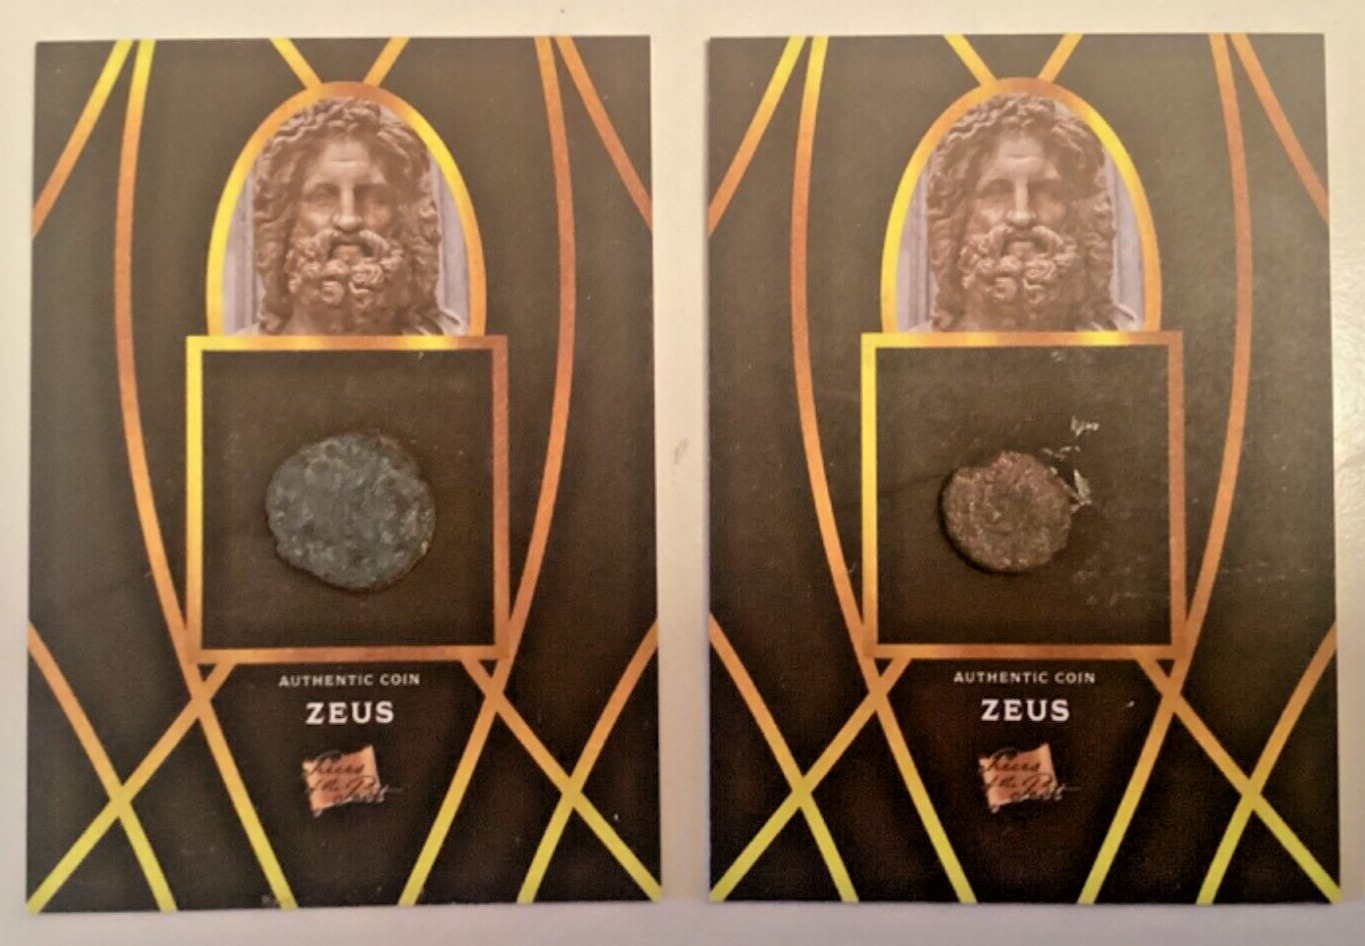 2 ZEUS ANCIENT COINS of ONLY 95 PIECES OF THE PAST - like leaf metal pop century